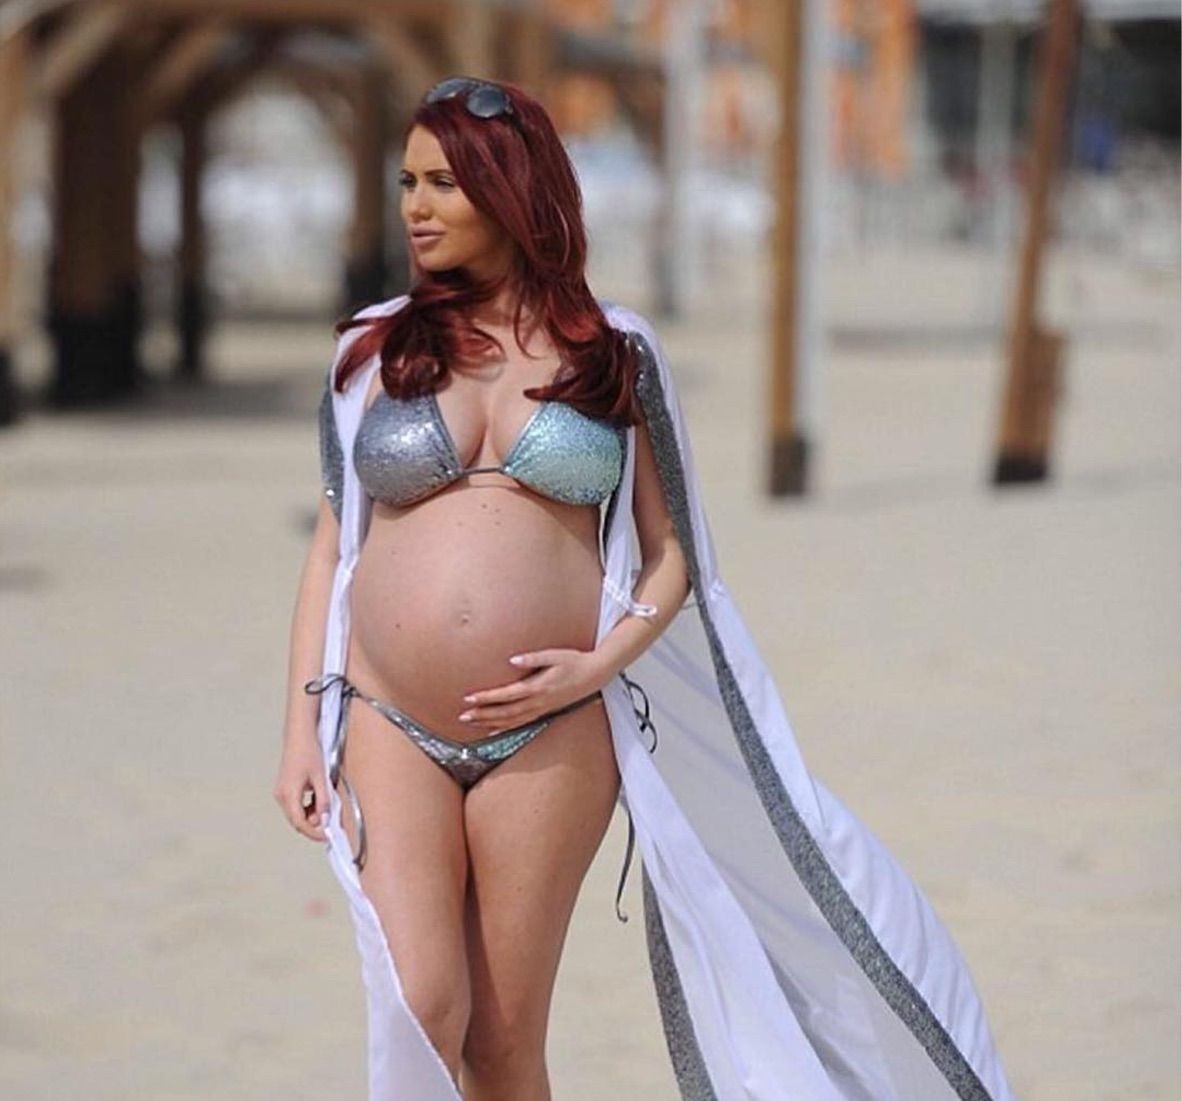 Amy Childs shares her “perfect” newborn daughters adorable name image